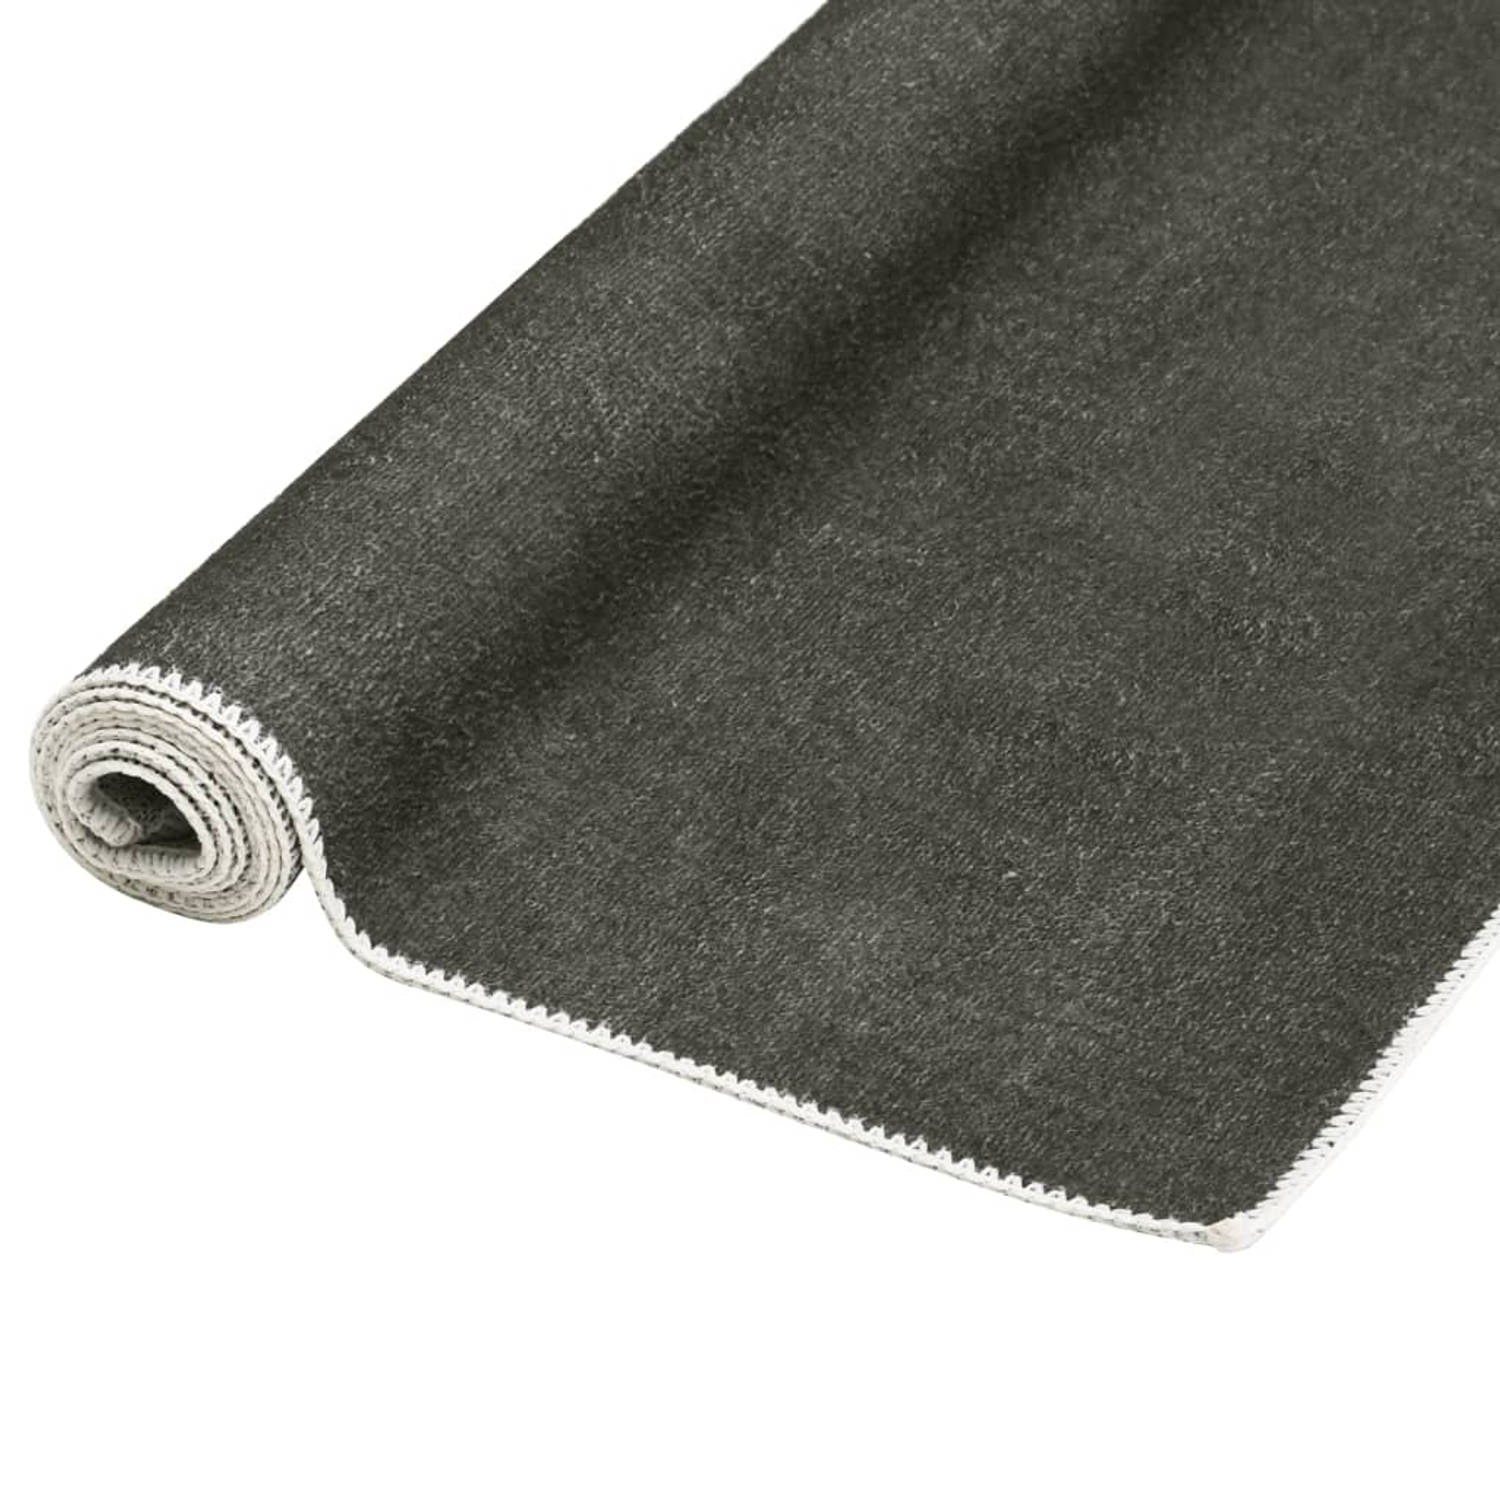 The Living Store Tapijt Polyester Pool - 180 x 270 cm - Taupe - Wasbaar